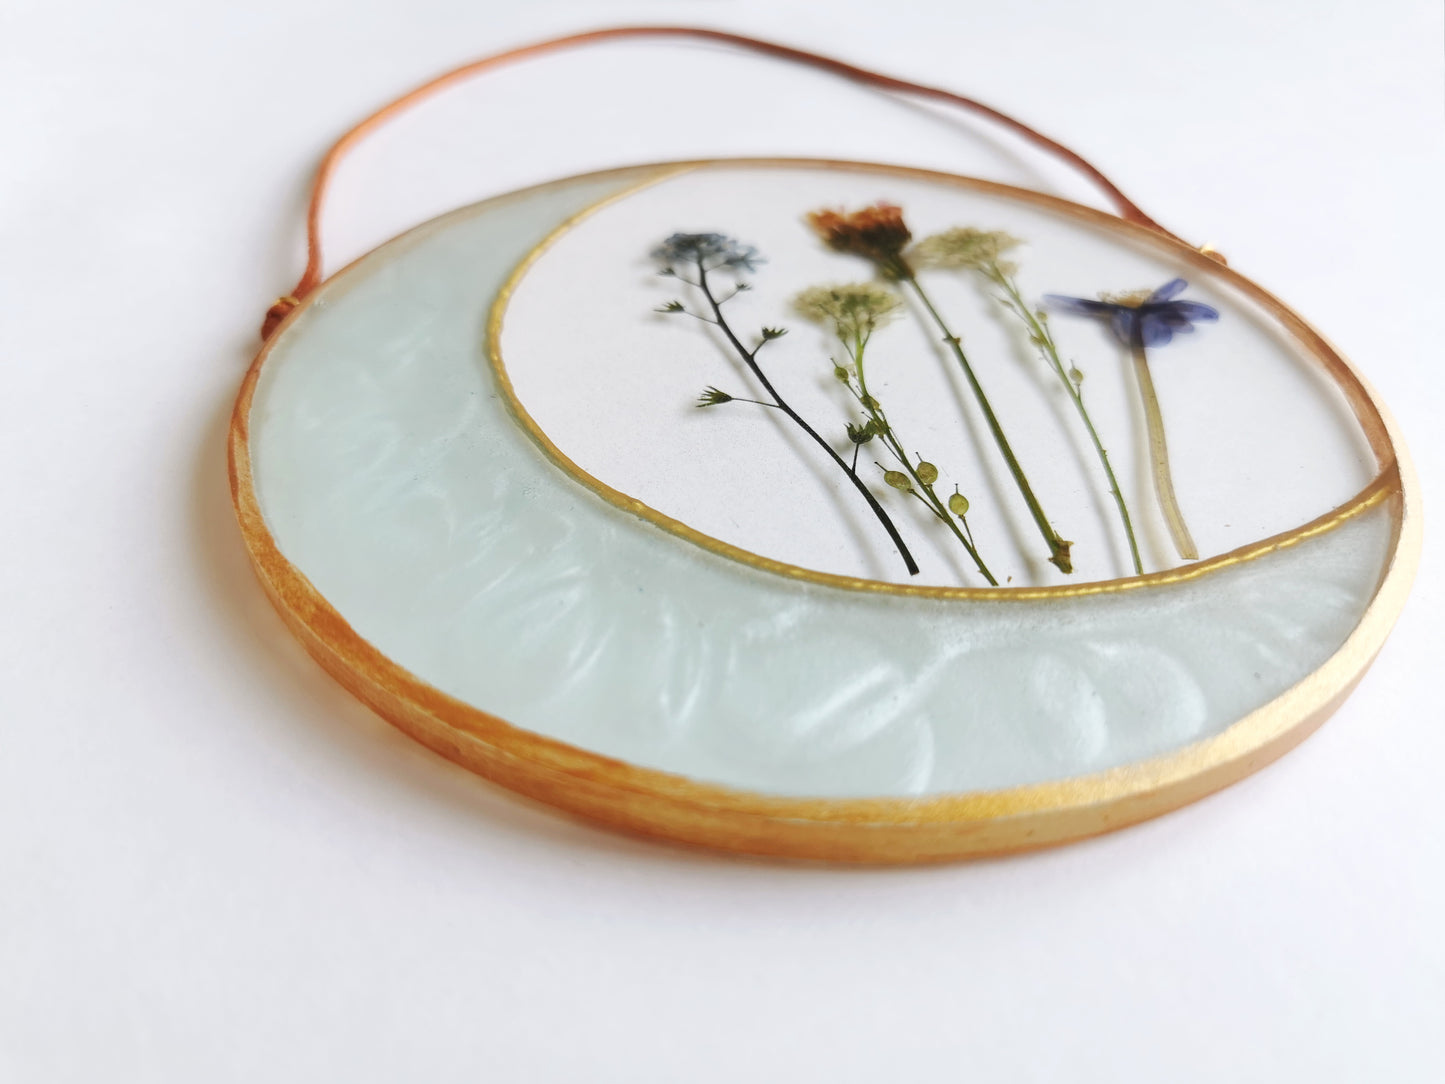 Floral moon art with real pressed flowers